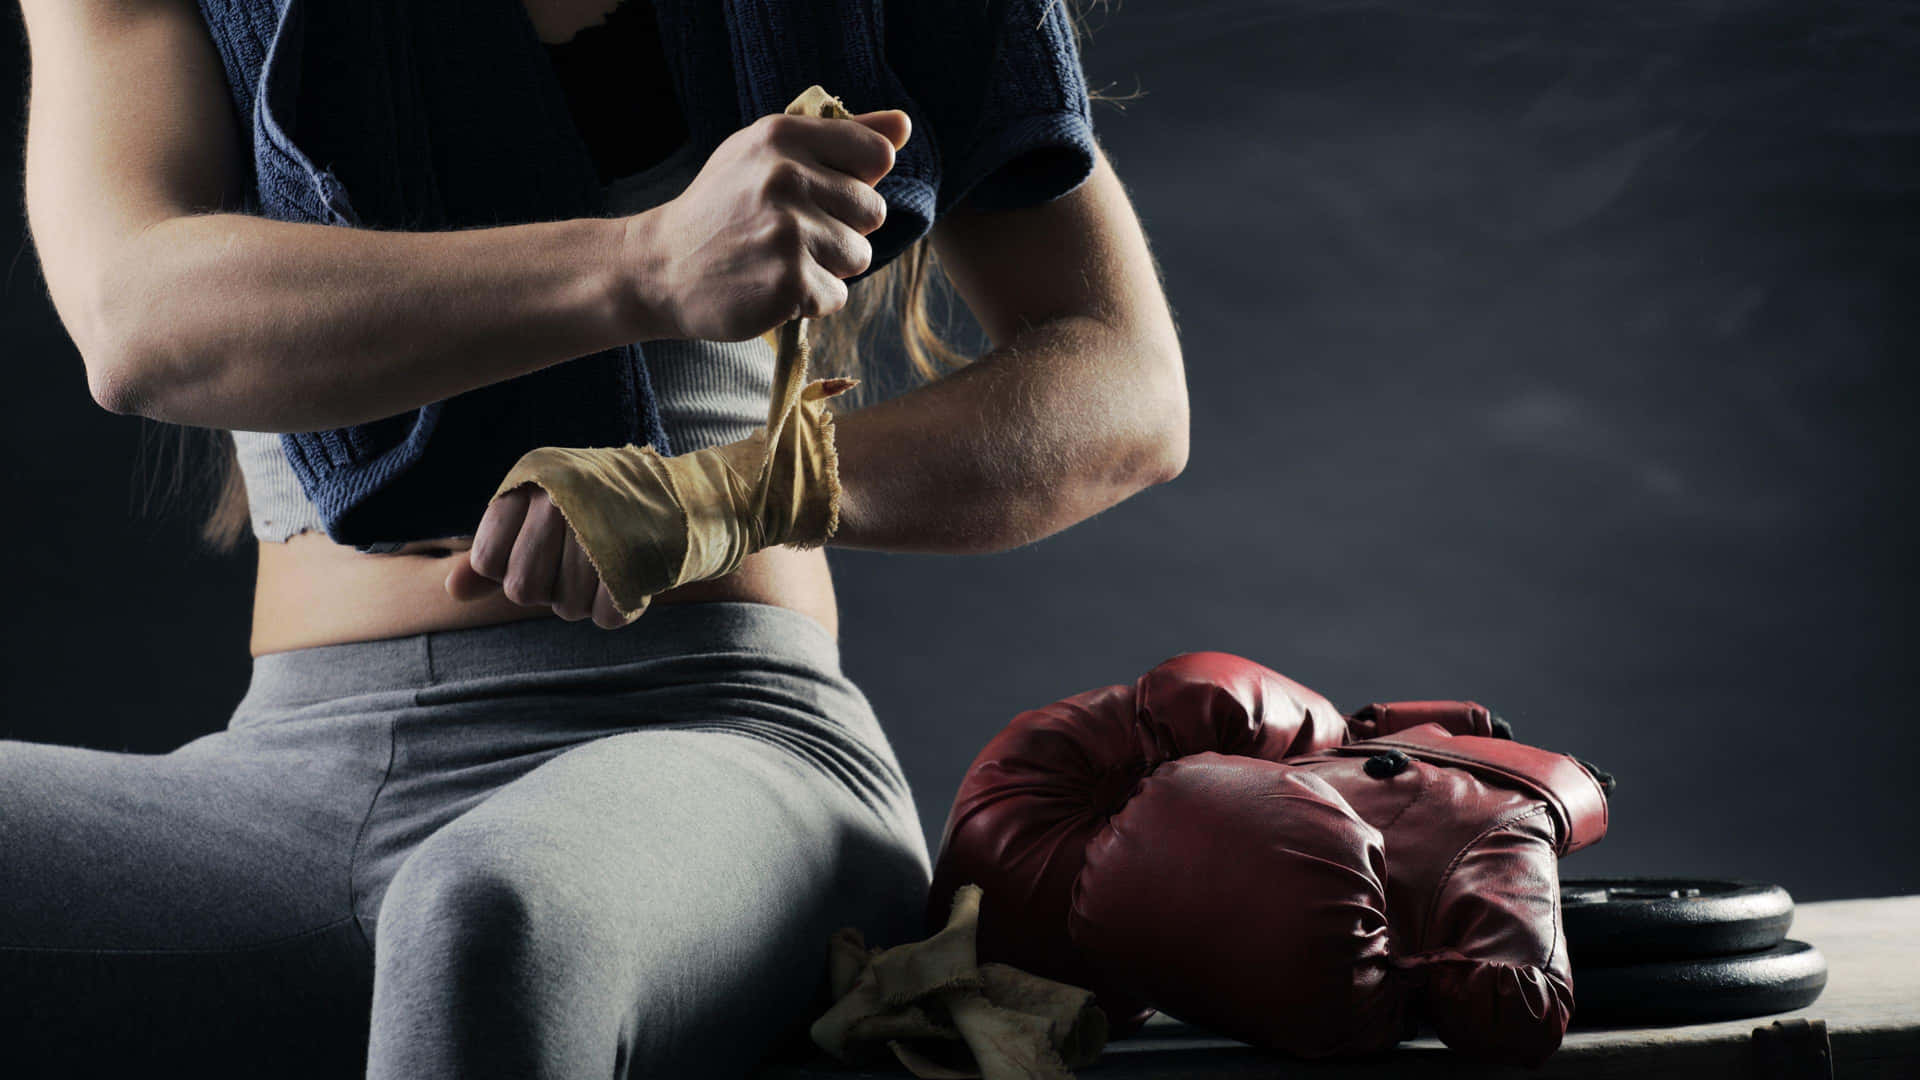 Boxer Wrapping Hands Before Training.jpg Wallpaper